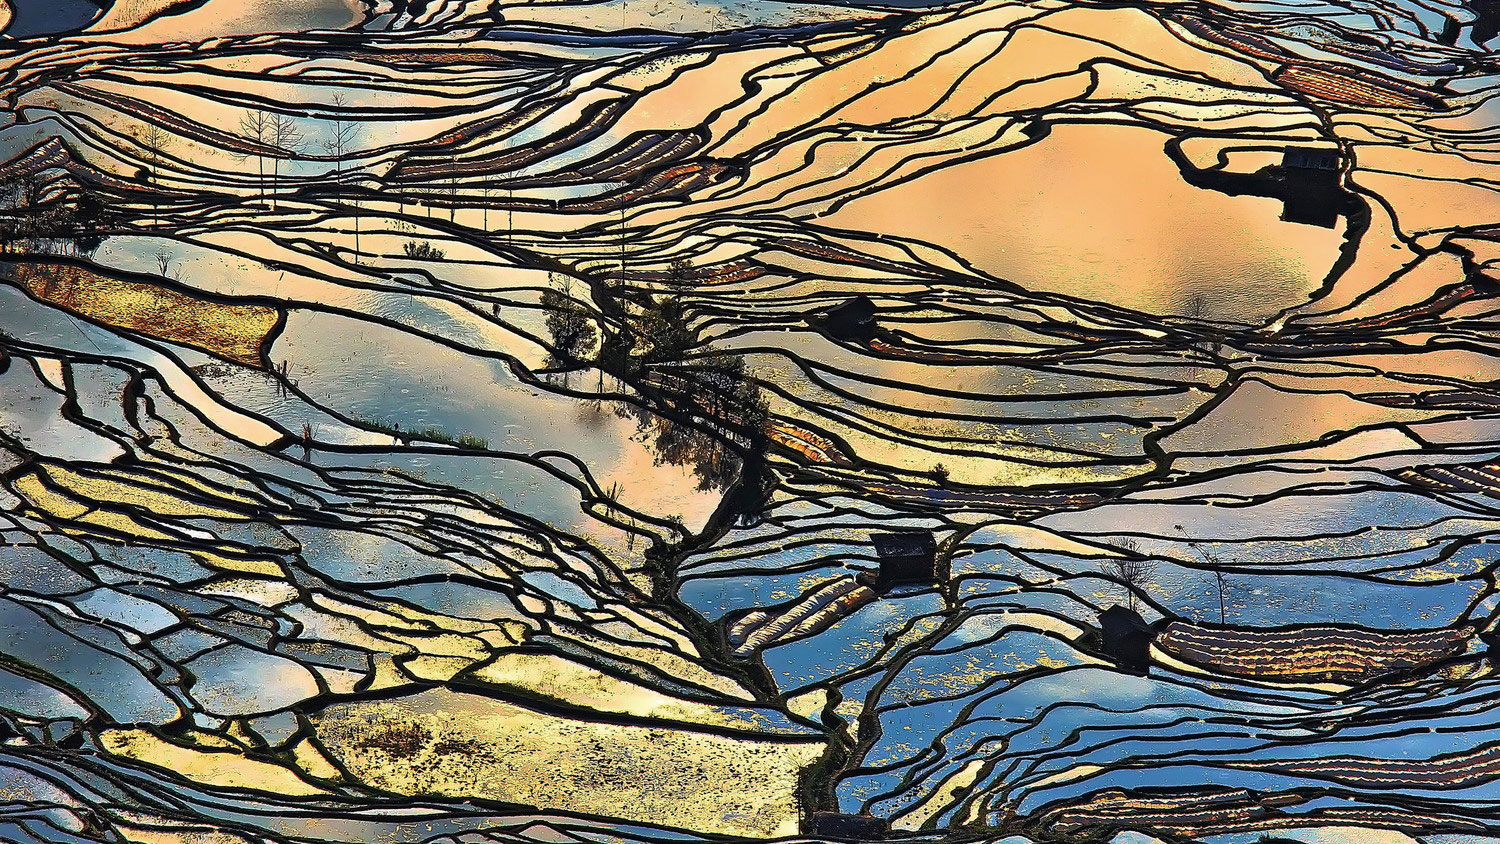 "Rice field" by Tang Pui Yee using PL filter